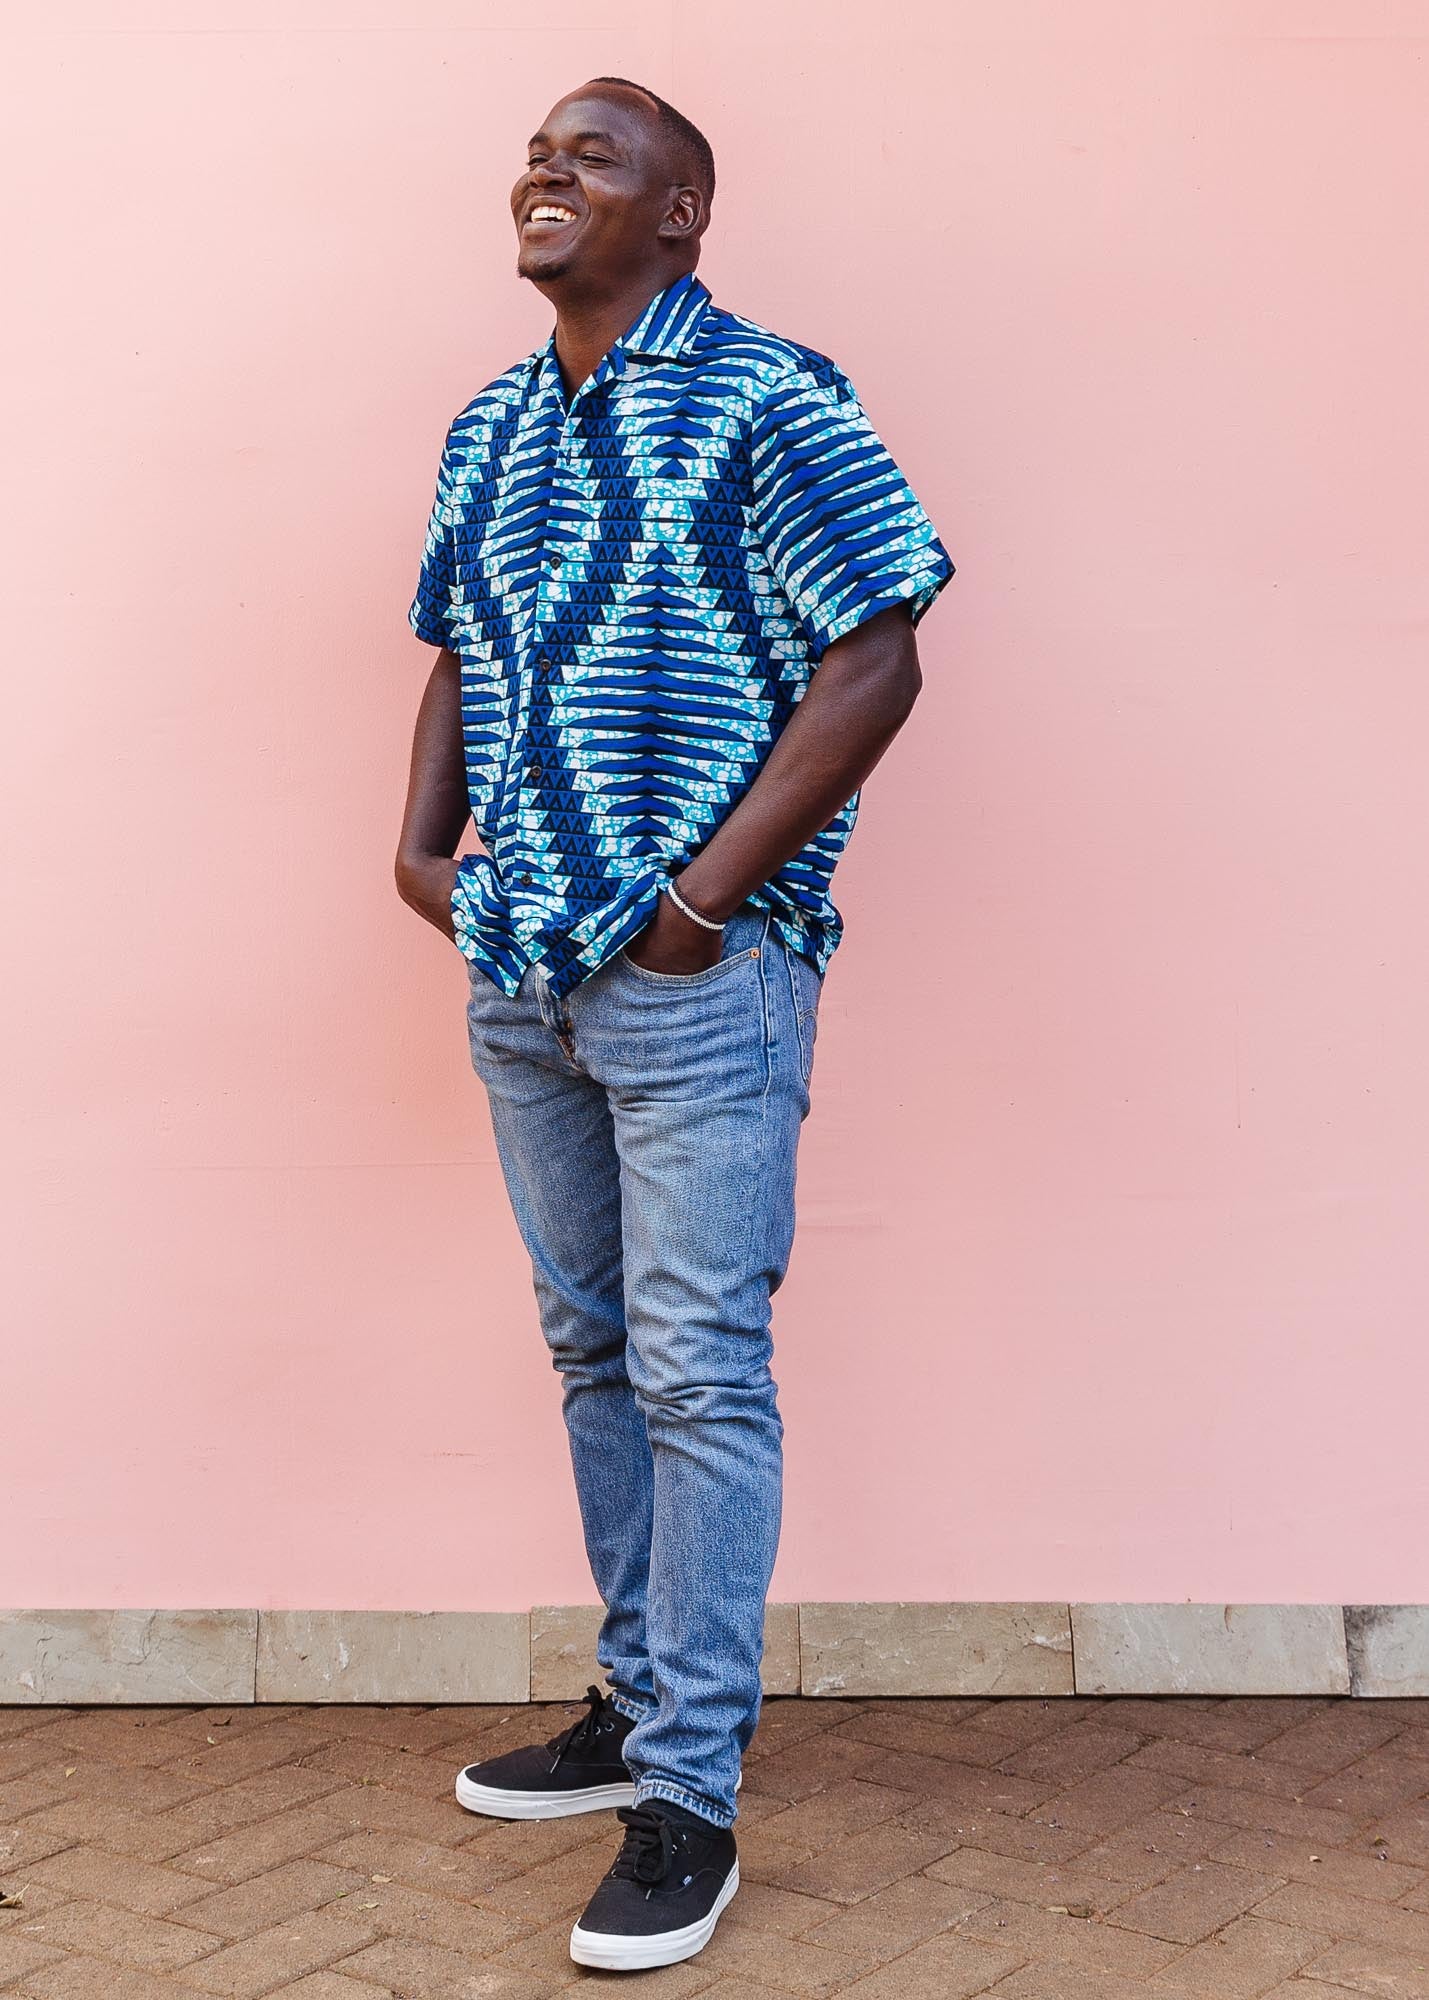 The model is wearing blue, sky blue and white colored men&#39;s shirt